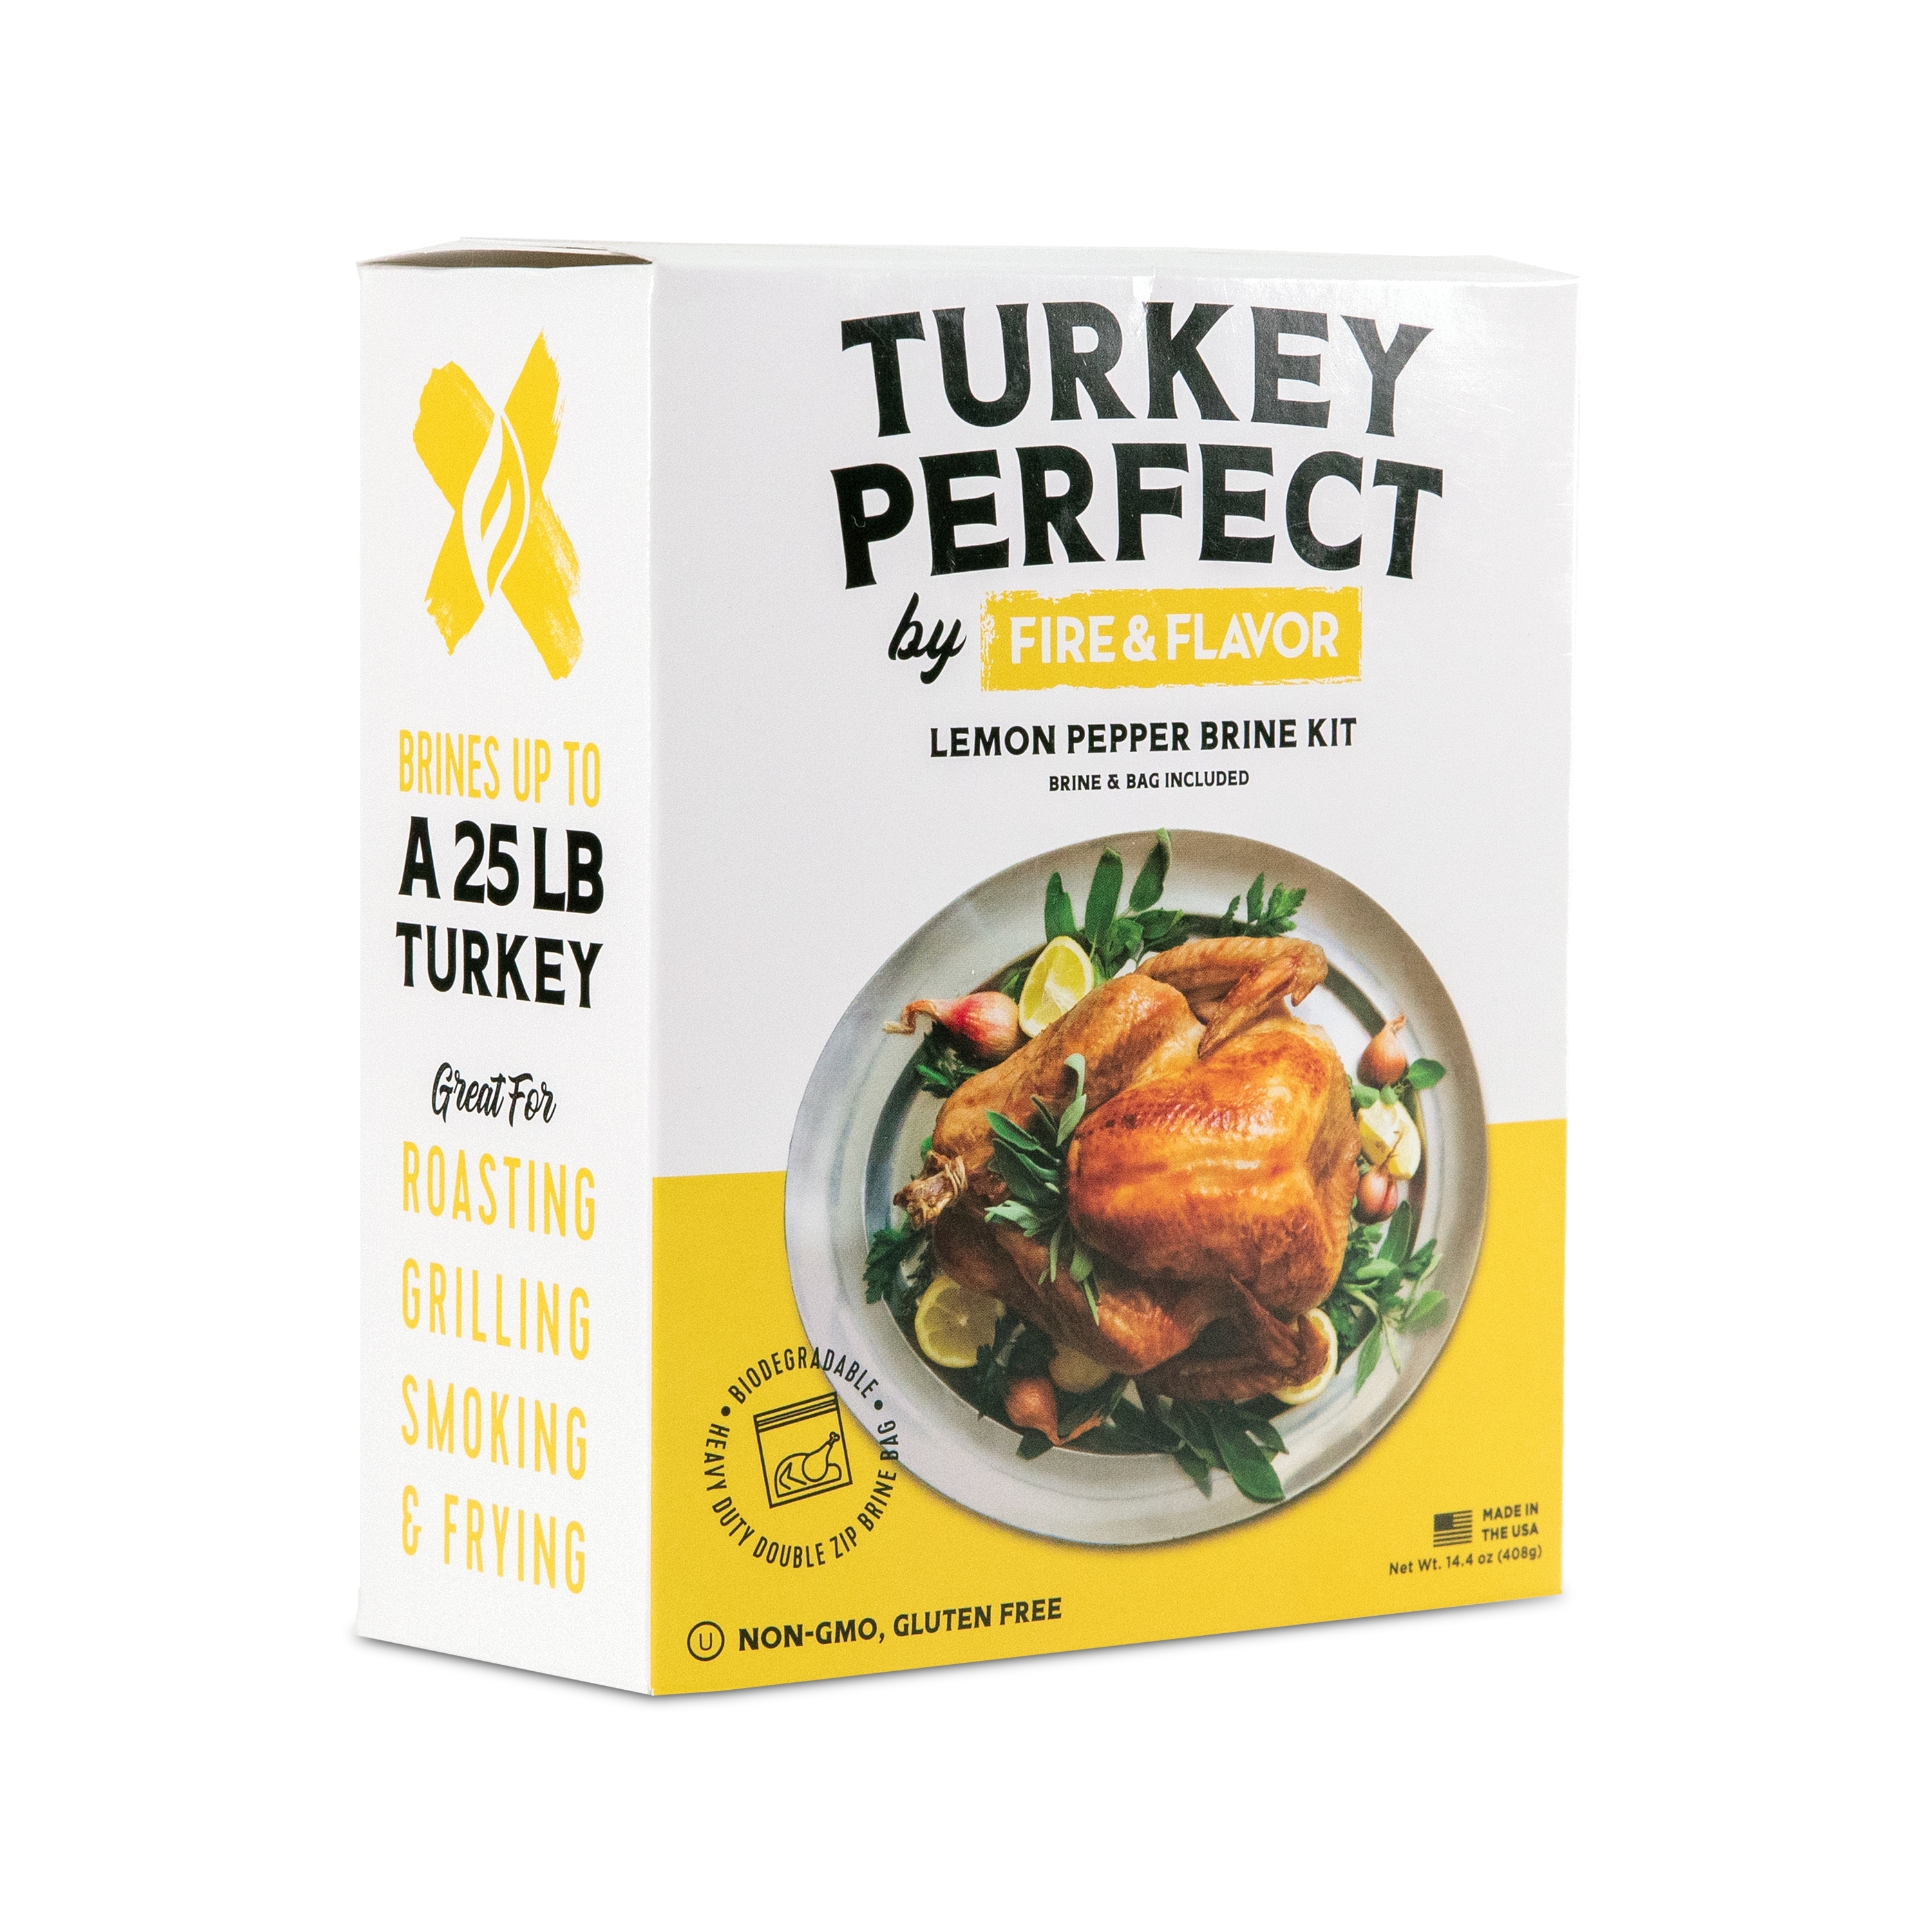 https://ak1.ostkcdn.com/images/products/is/images/direct/b53e758f8b5d6f42888f277ac7fe6be1d7cc6900/Turkey-Perfect-by-Fire-%26-Flavor-All-Natural-Lemon-Pepper-Brine-Kit%2C-Includes-Brining-Bag%2C-14.4oz.jpg